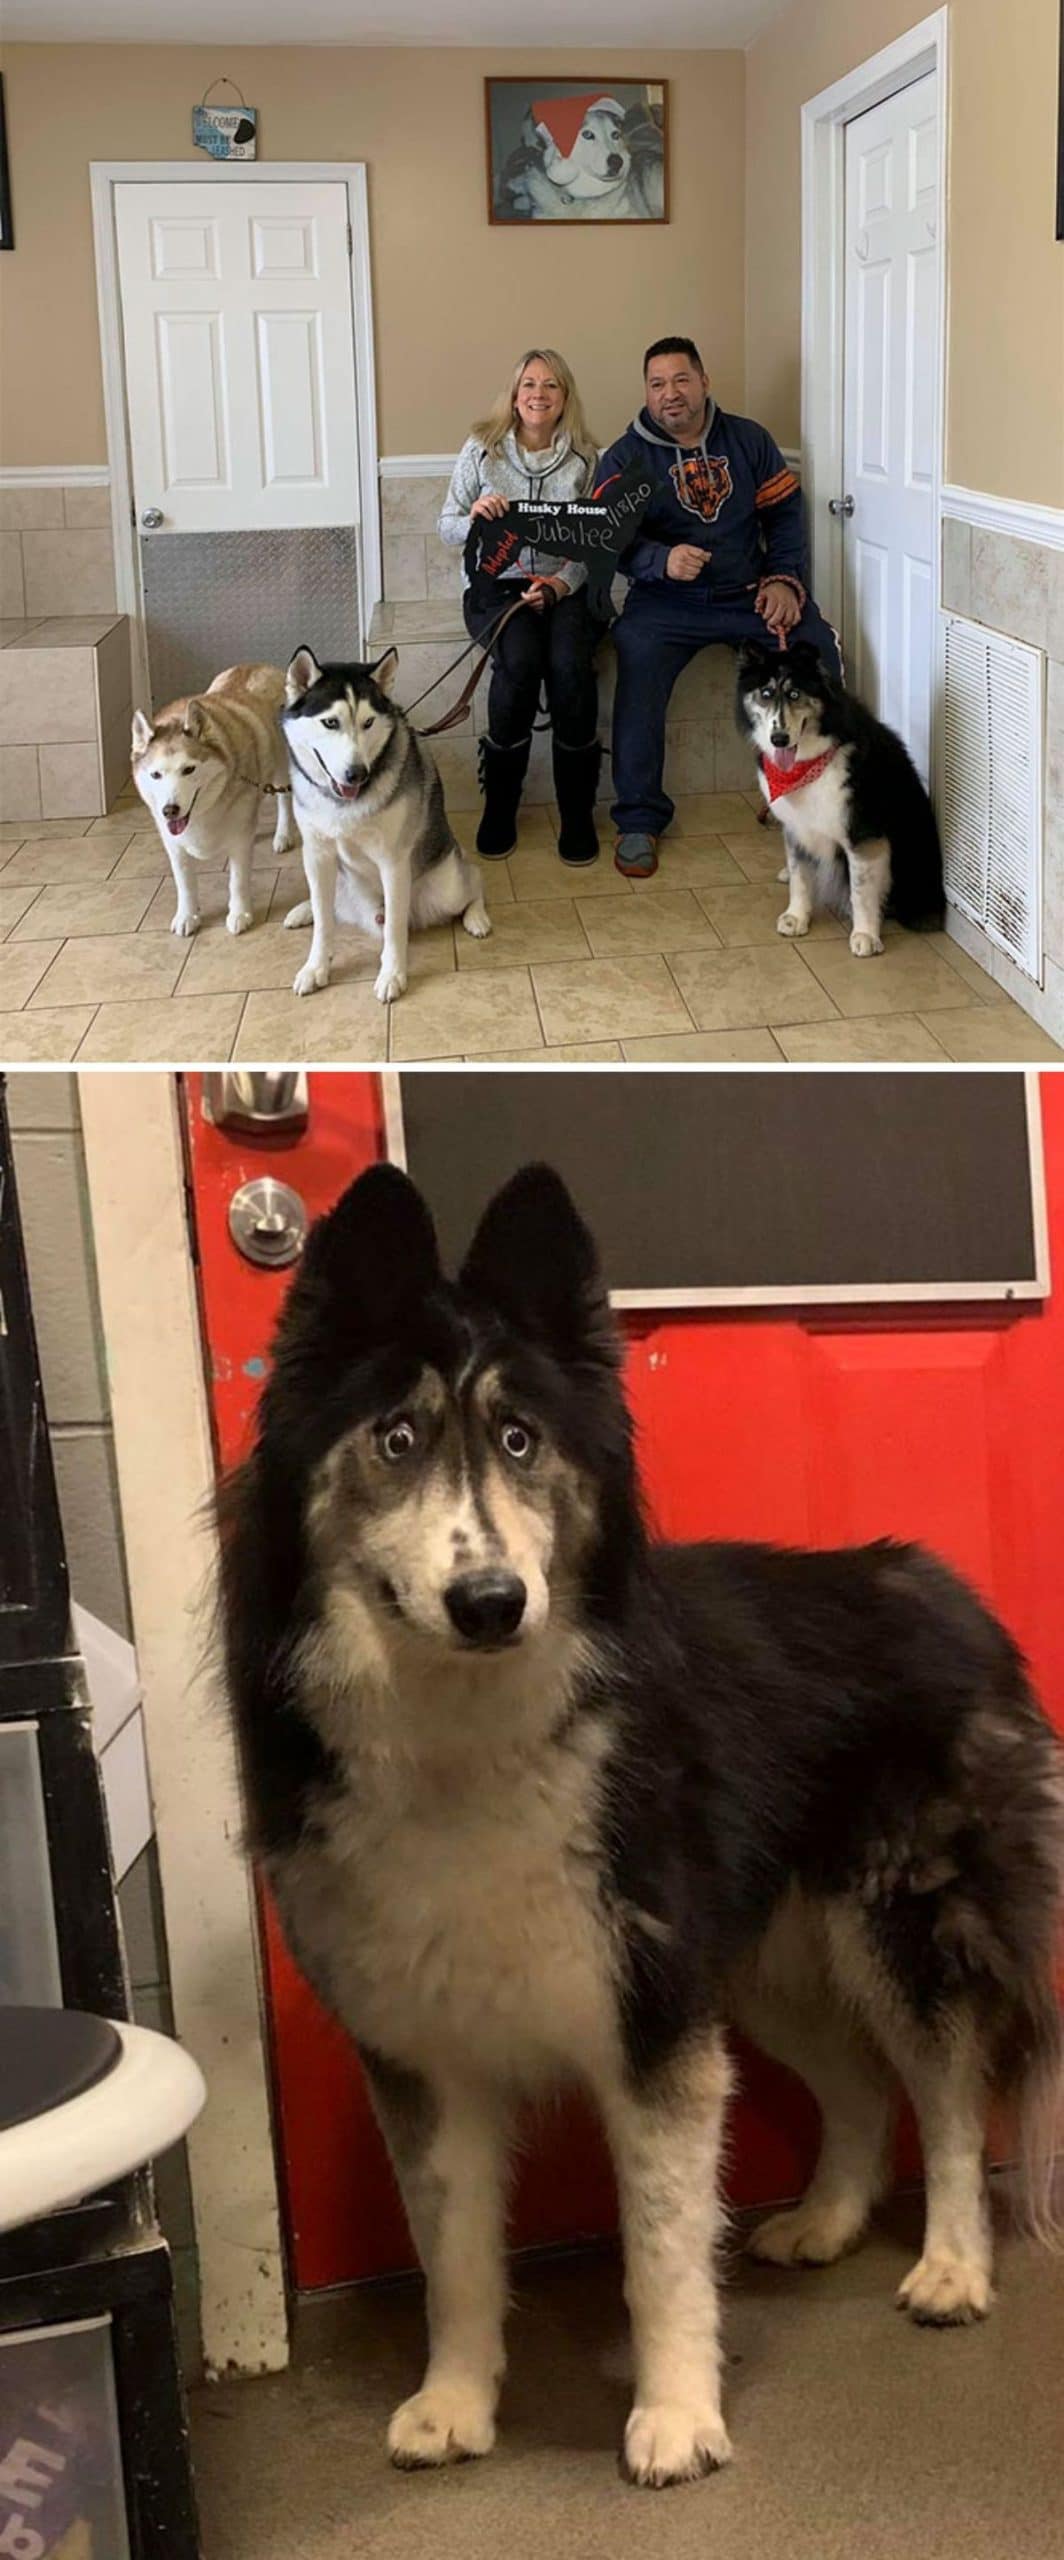 1 photo of brown and white & black and white huskies held by a woman and black and white dog held by a man and 1 photo of the third dog